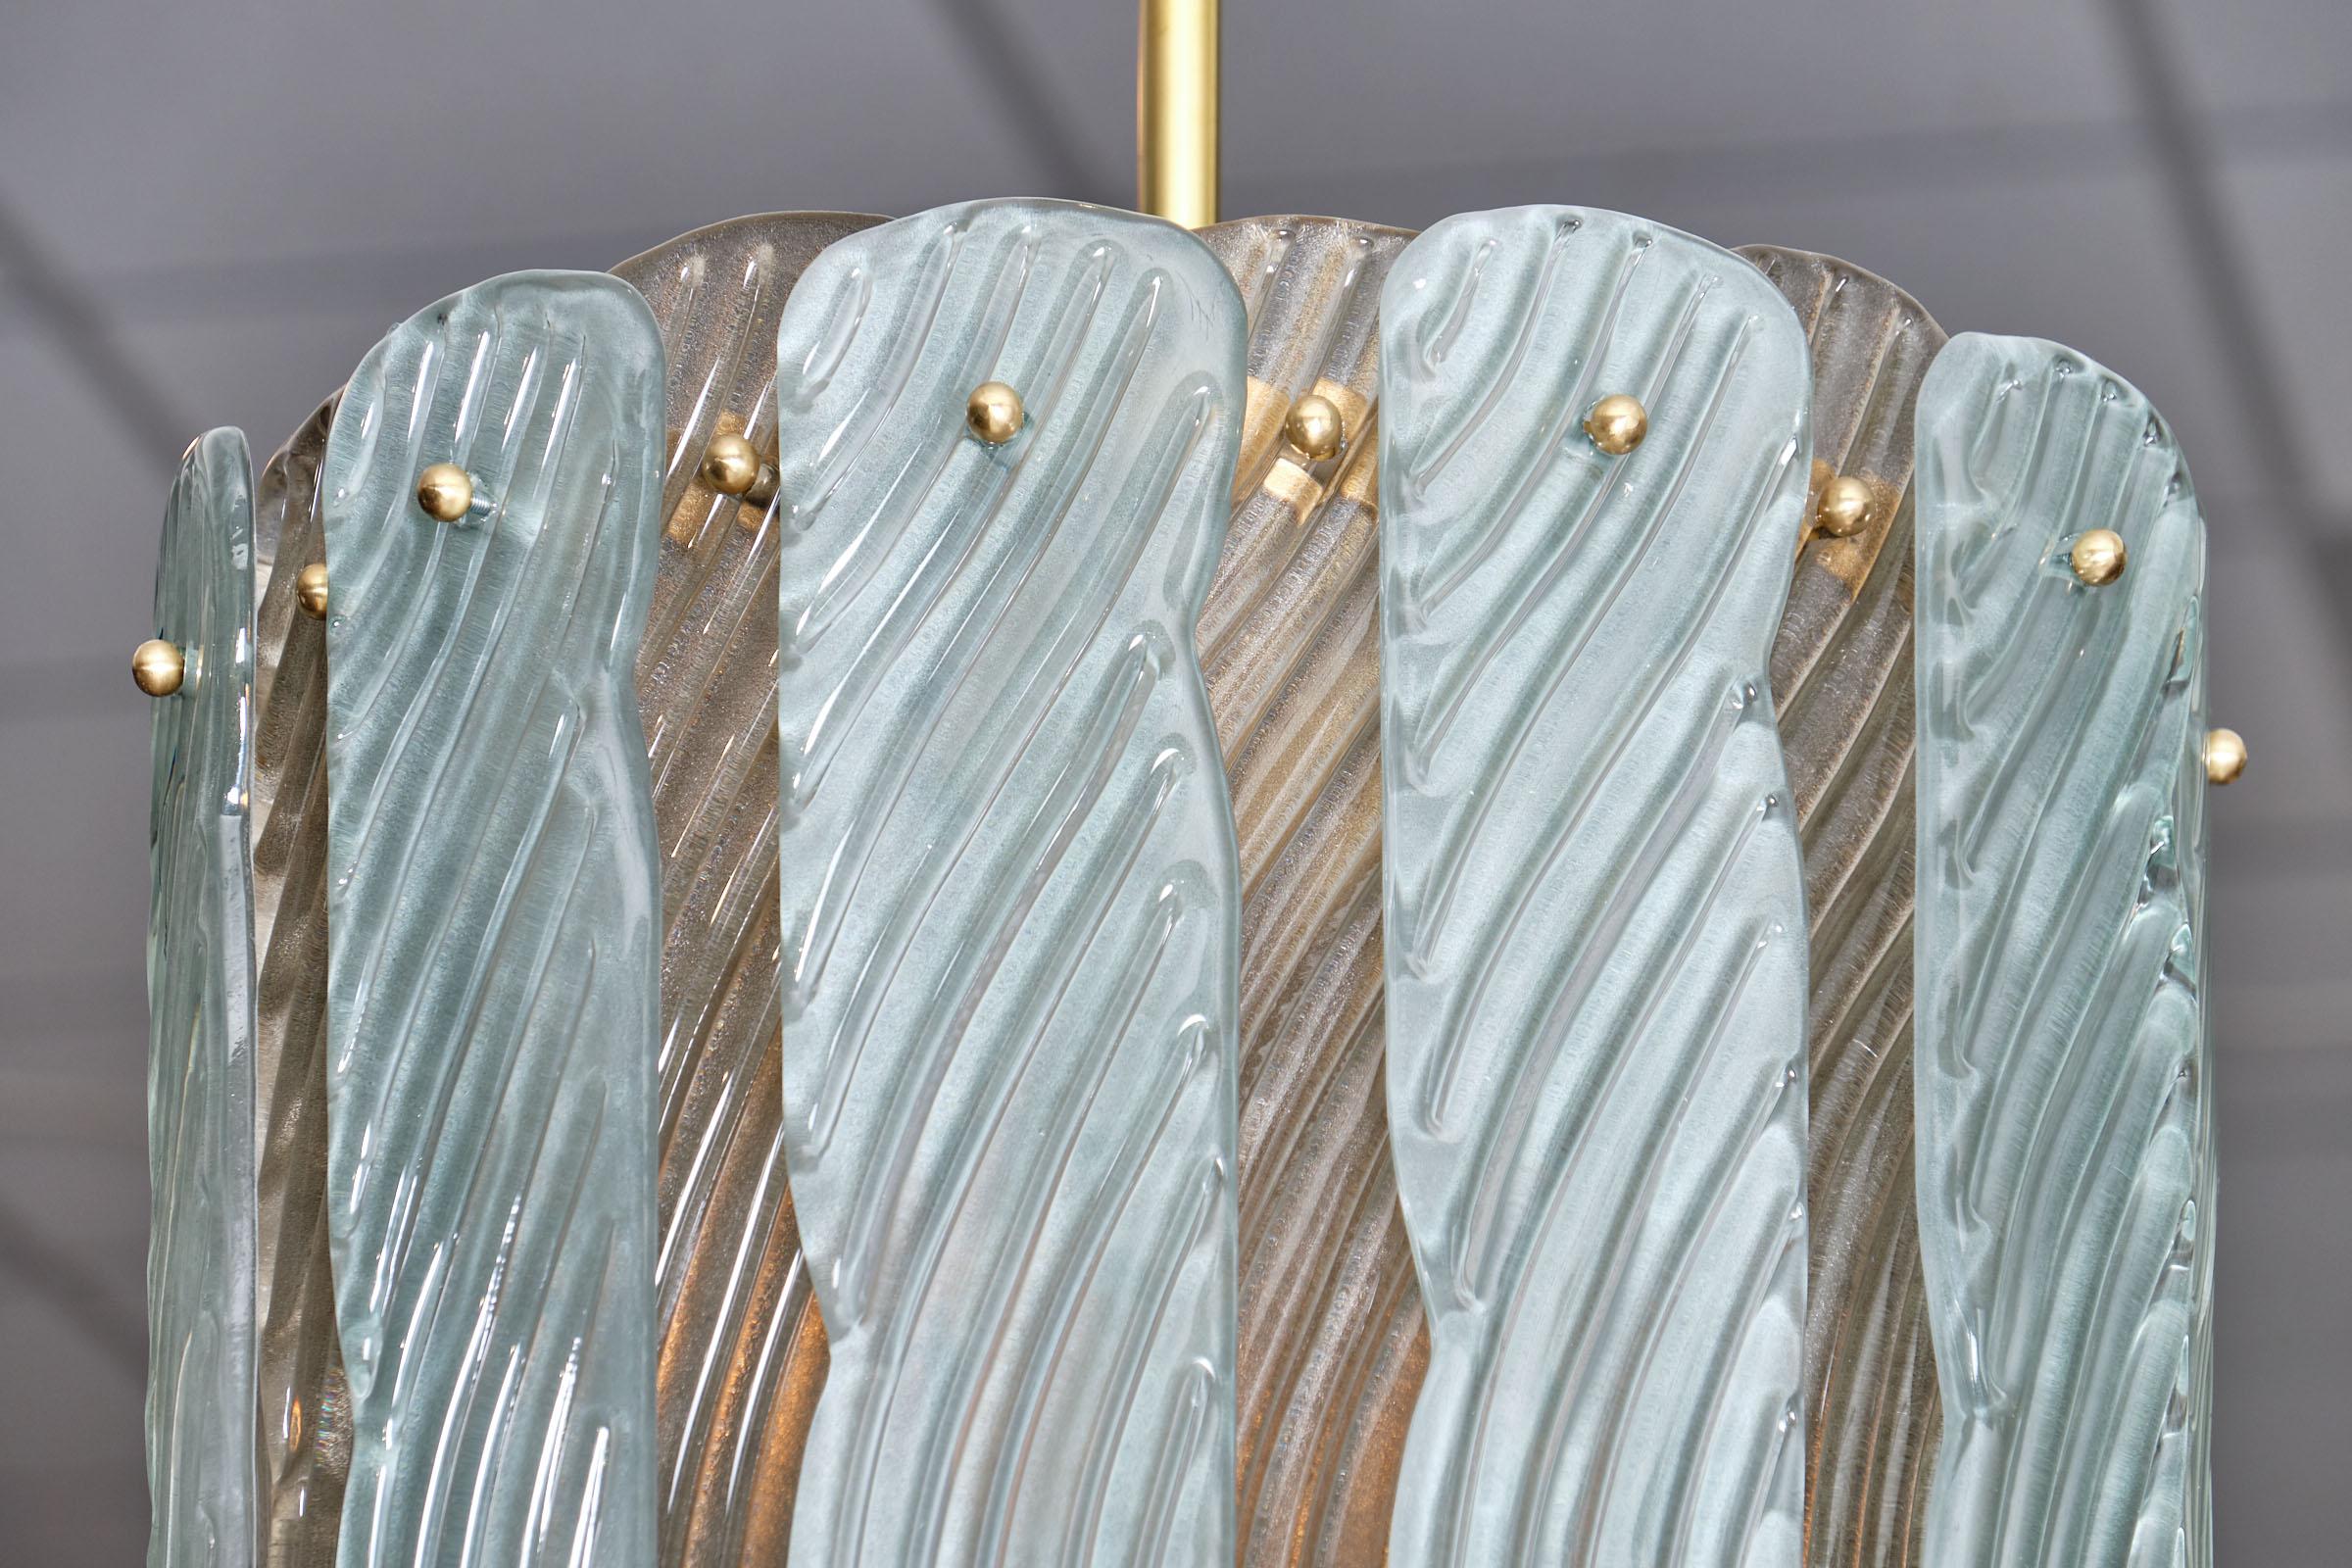 Spectacular Murano glass two-toned lantern featuring a combination of shaped glass blades in light blue and a subtle amber. This chandelier has been newly wired to fit US standards. The height from ceiling is currently 55